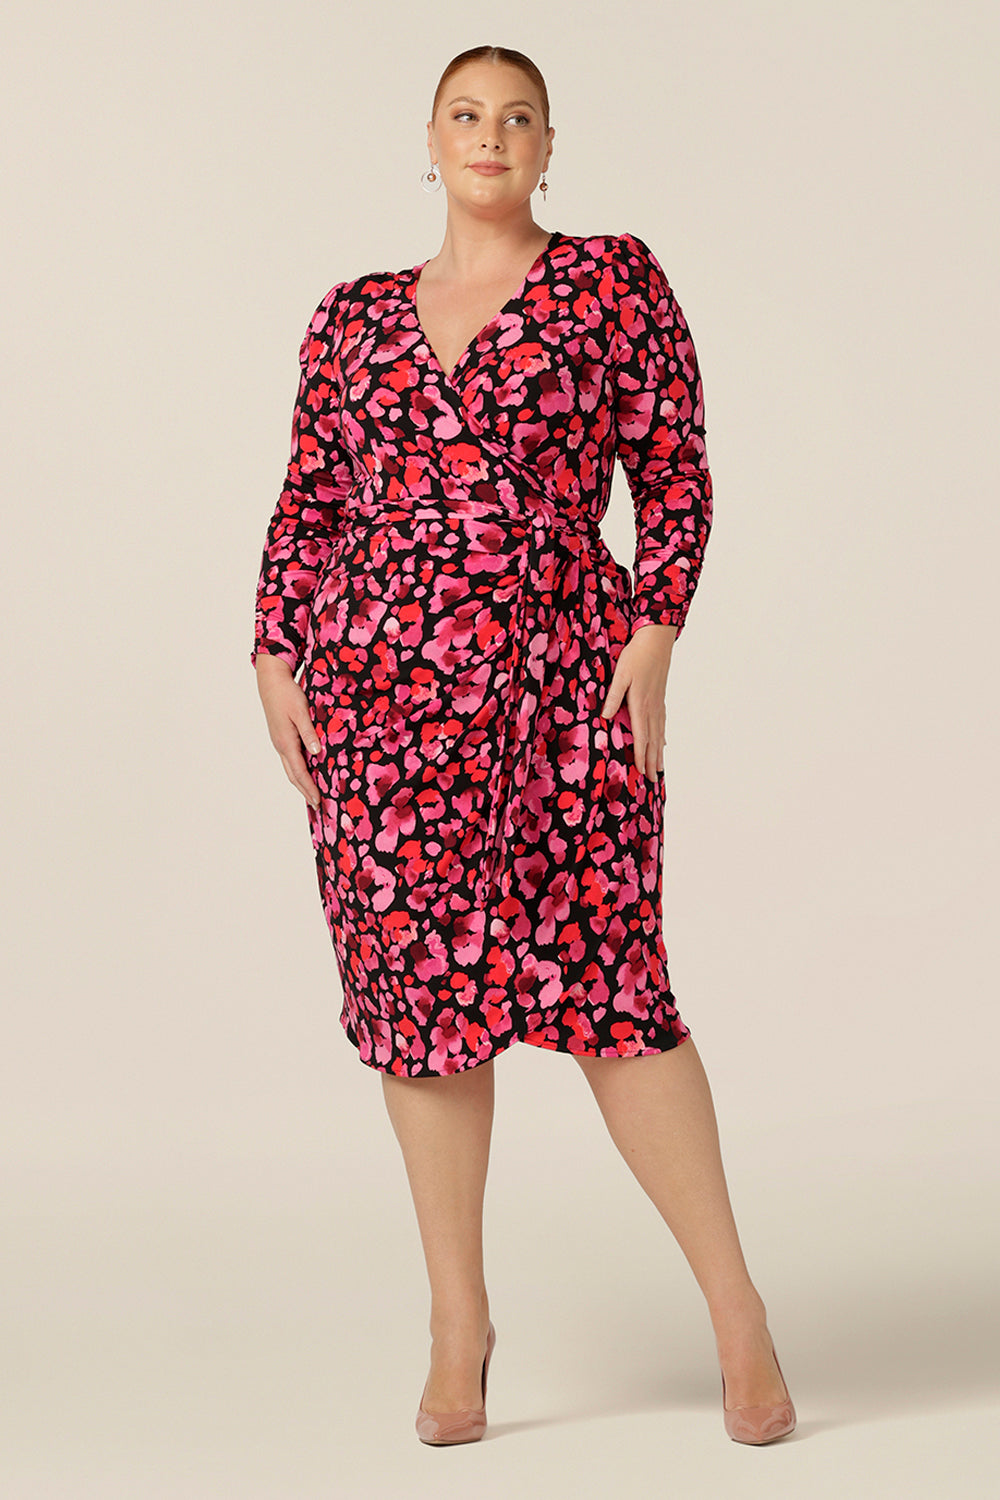 A fuller figure, size 18 woman wears a jersey wrap dress with long sleeves and a tulip skirt. Made in Australia and available to shop online in Australia and New Zealand, this wrap dress can be worn for corporate wear or as a occasion dress for date night style.